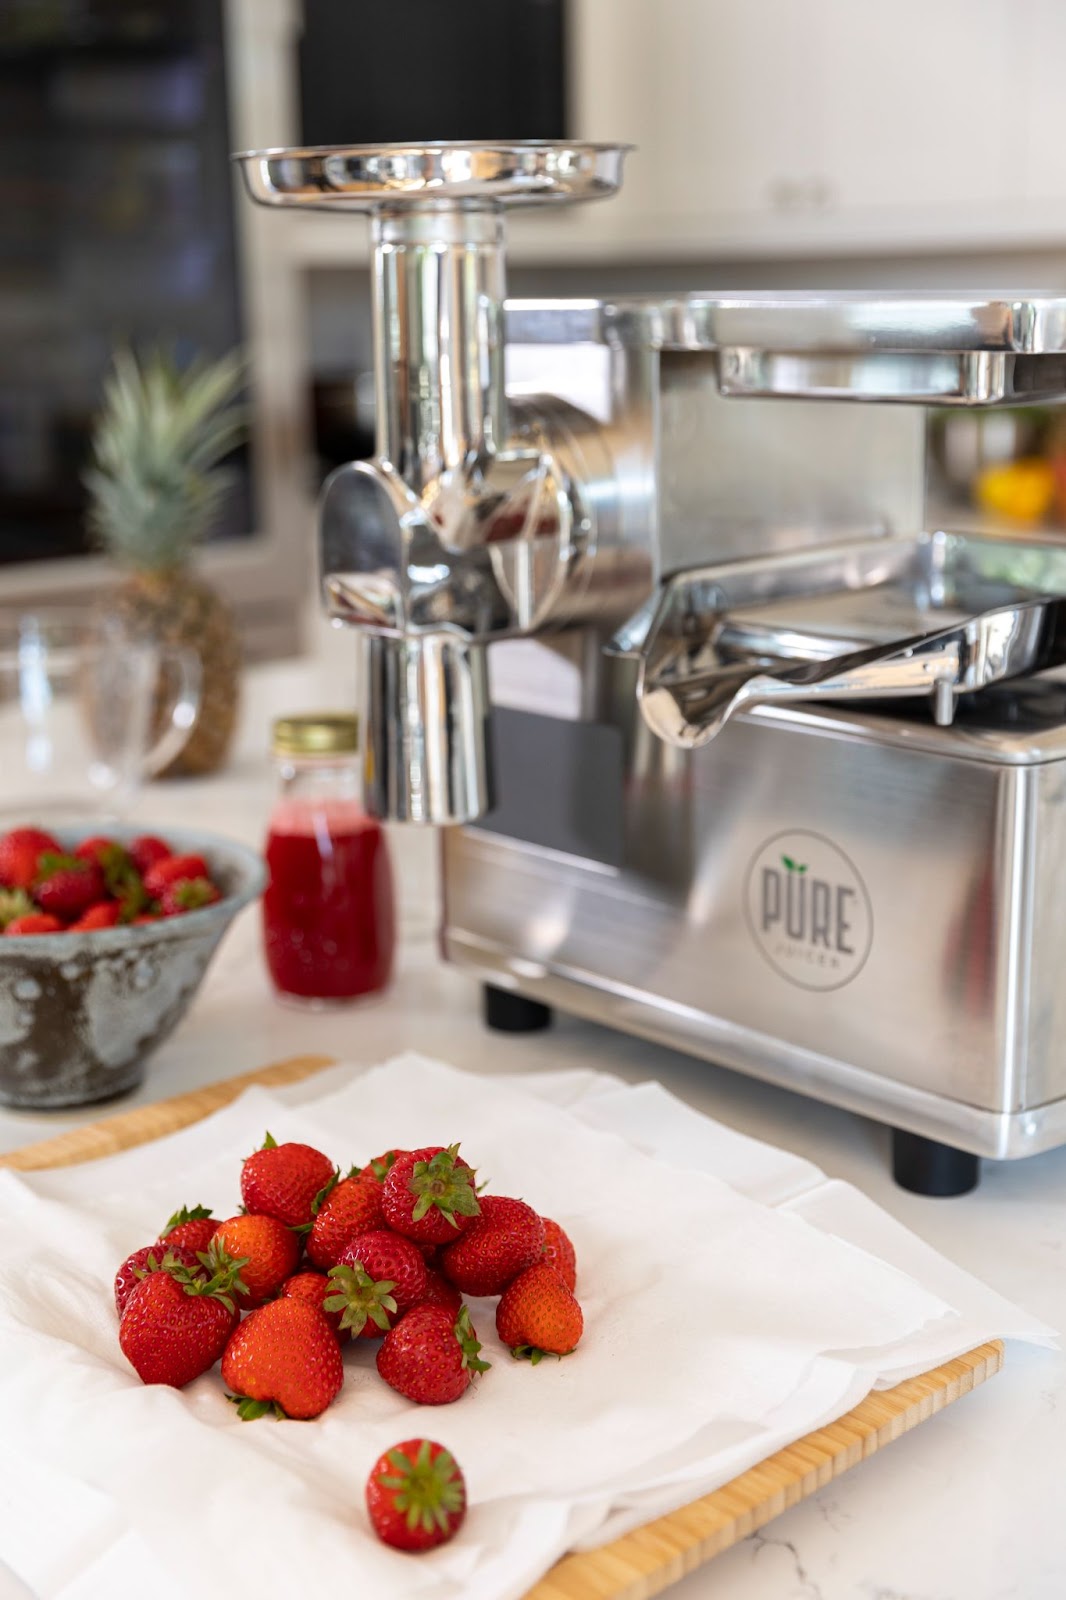 Strawberries in front of pure juicer